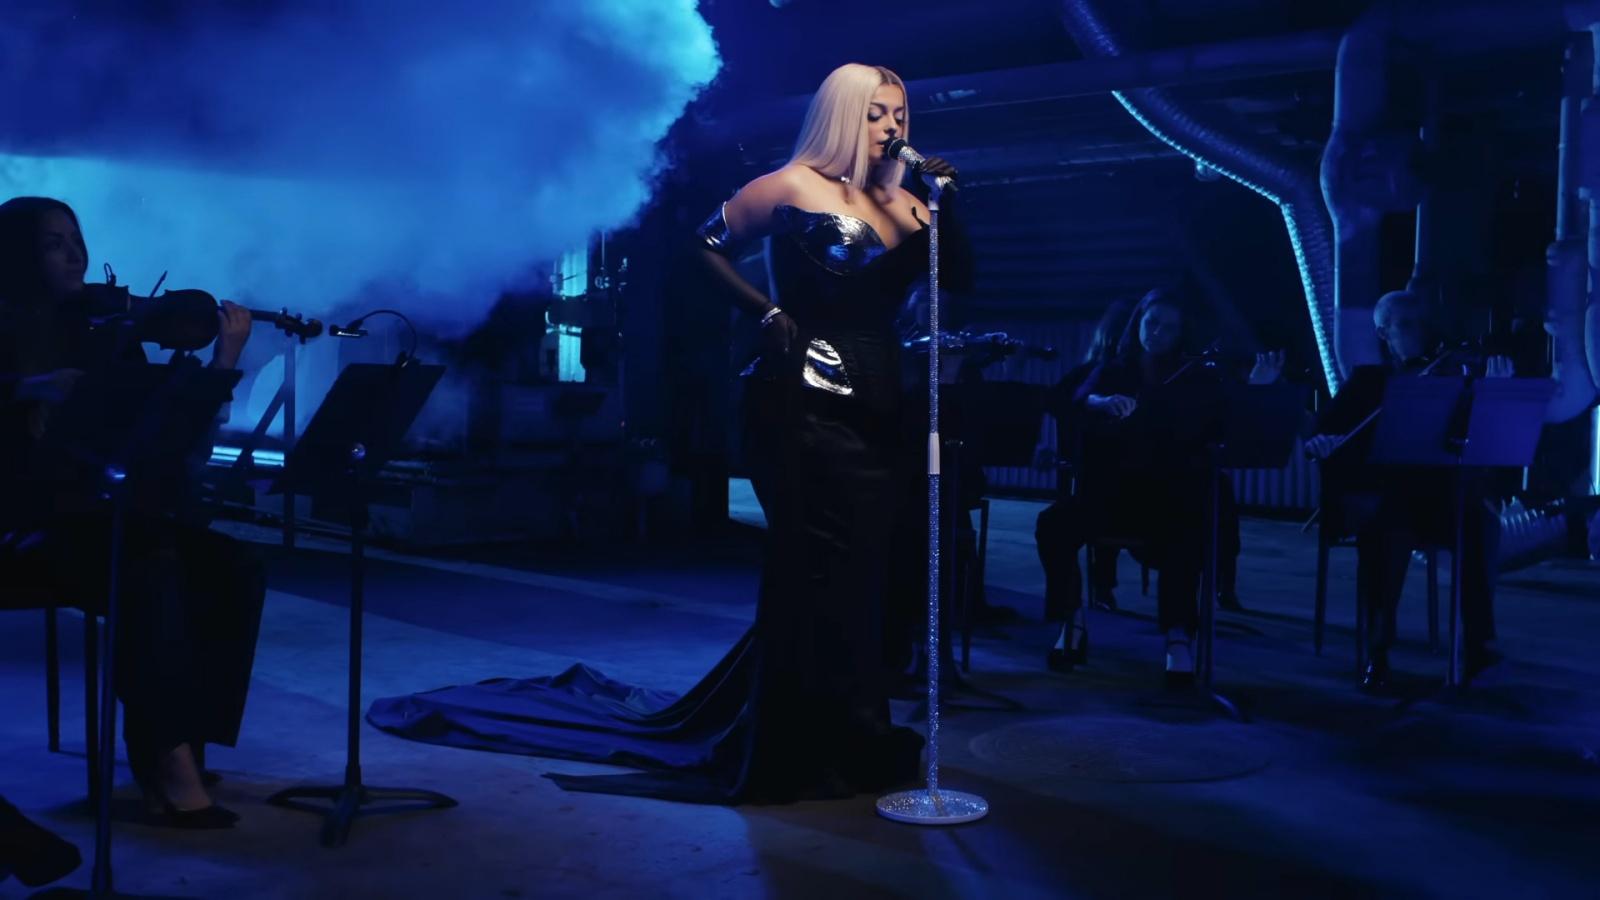 Bebe Rexha in an elegant black gown performing onstage in an award show